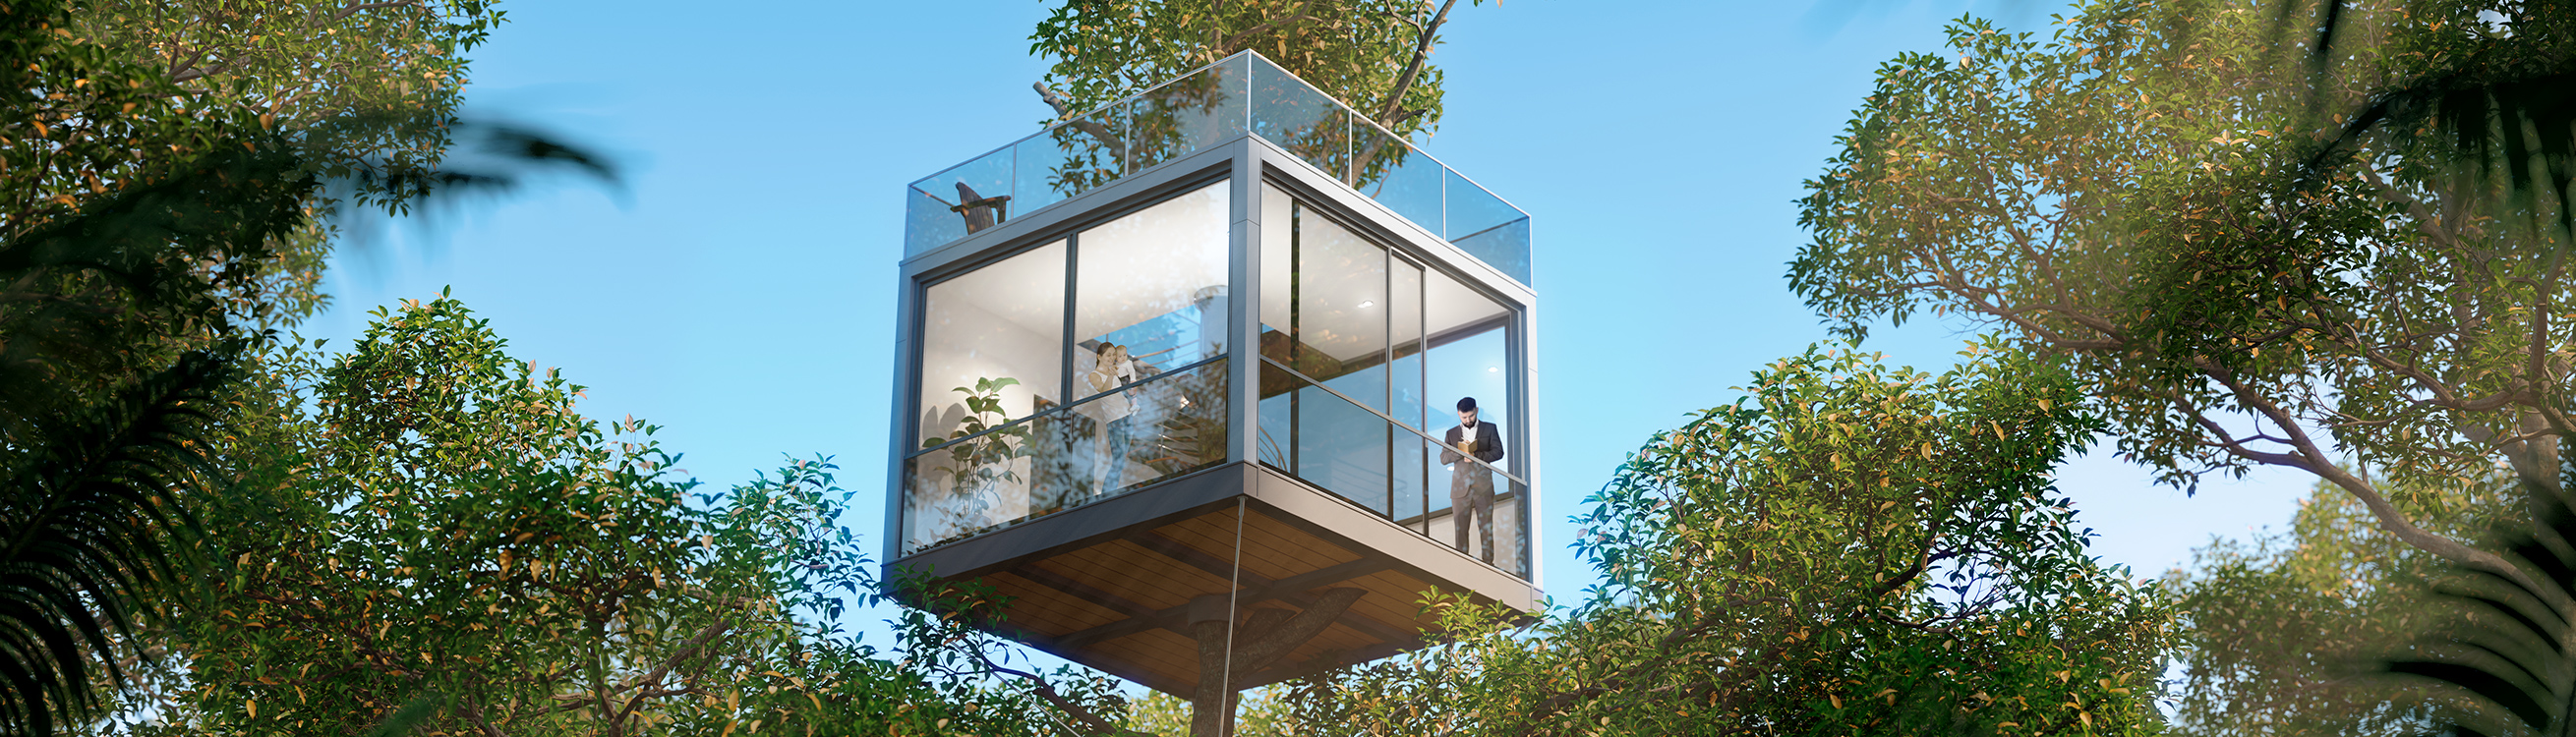 a sustainable glass house 